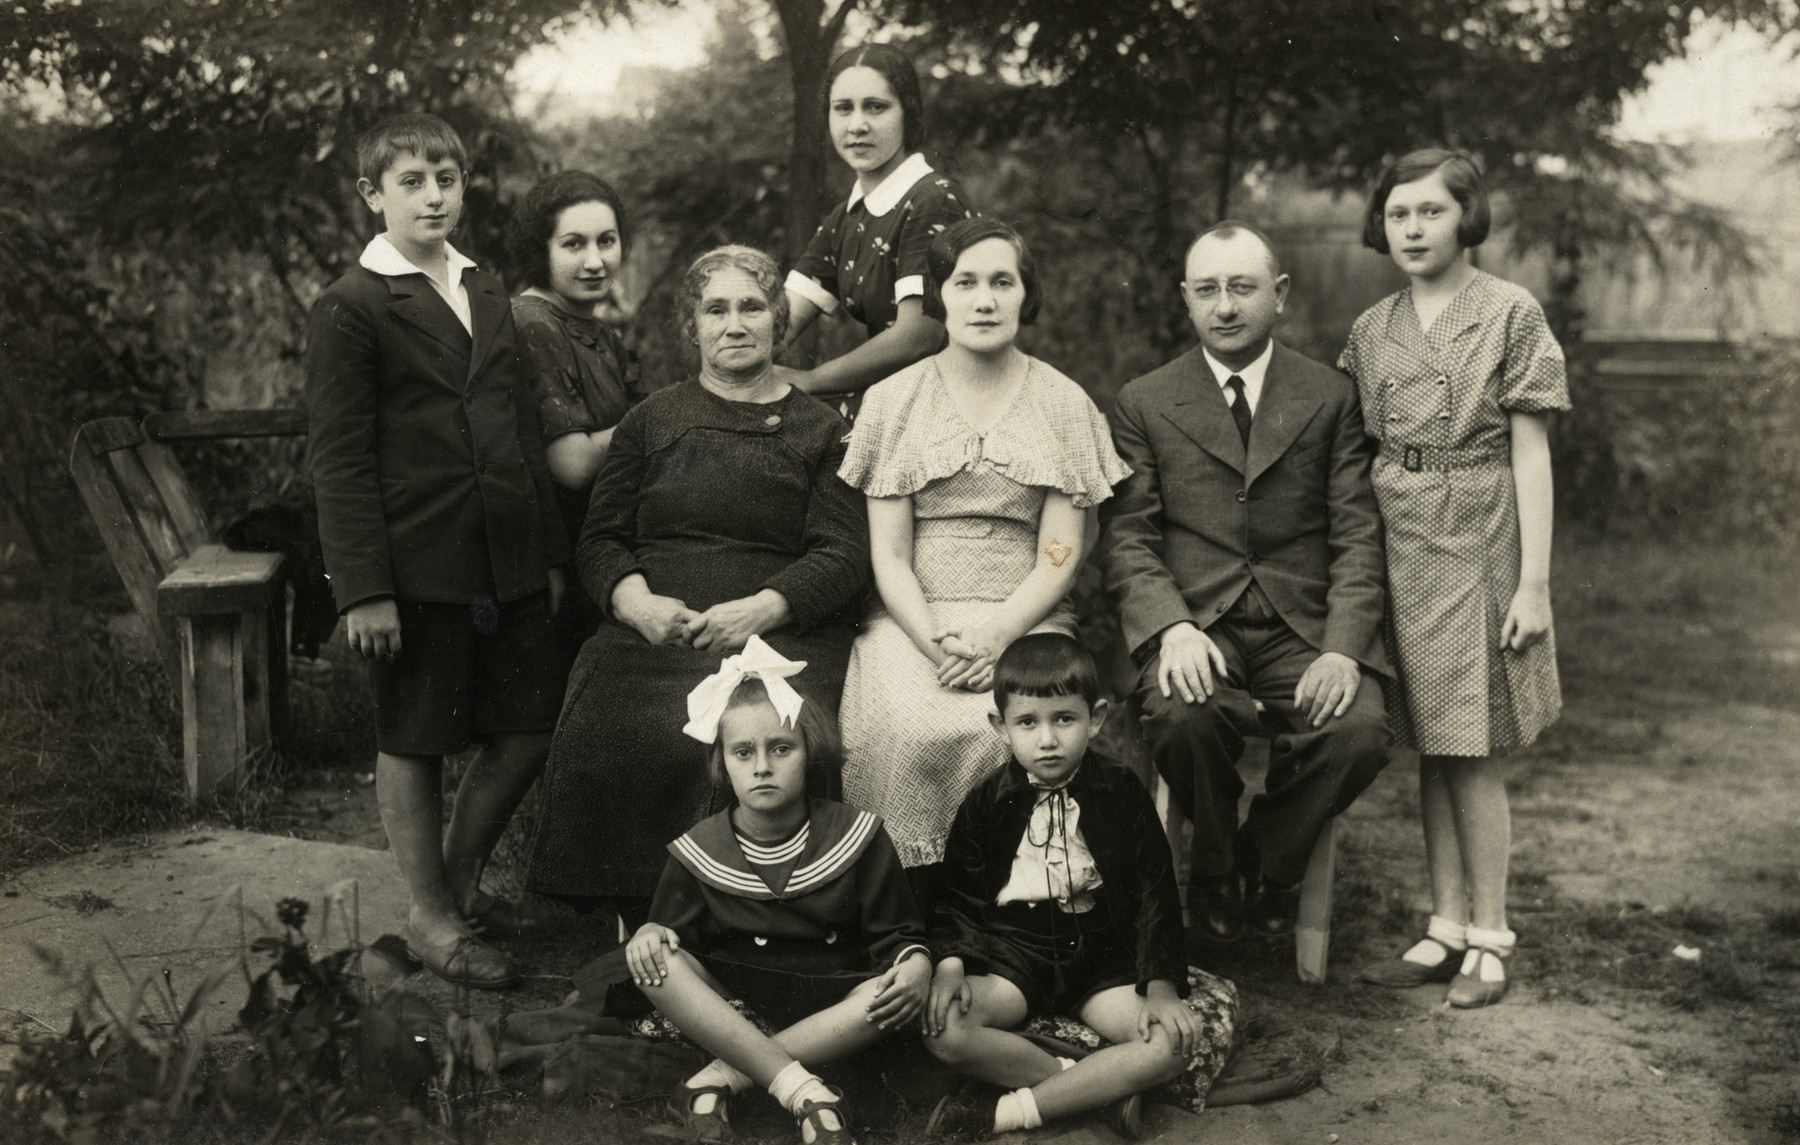 Group portrait of the extended Kracowski family at their summer dacha.

Ewa Kracowska's parents, Esther and Dr. Samuel Kracowski,  are seated in the middle; Ewa is standing on the far right; and her brother Julek is seated in front, on the right.  Berl Rabinovitch is standing on the far left.